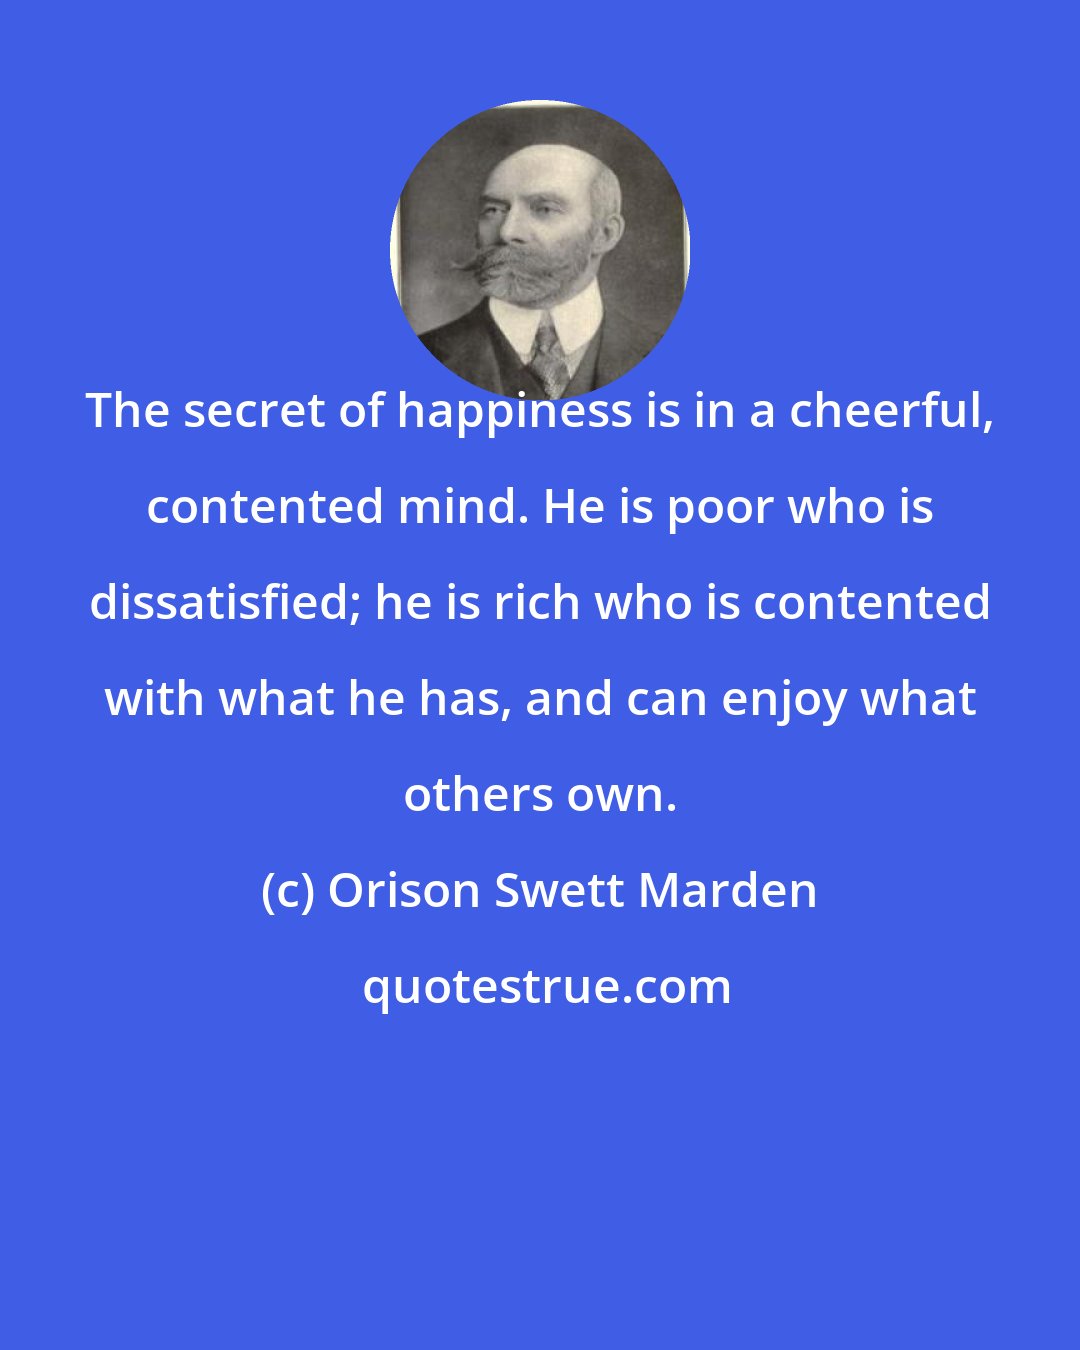 Orison Swett Marden: The secret of happiness is in a cheerful, contented mind. He is poor who is dissatisfied; he is rich who is contented with what he has, and can enjoy what others own.